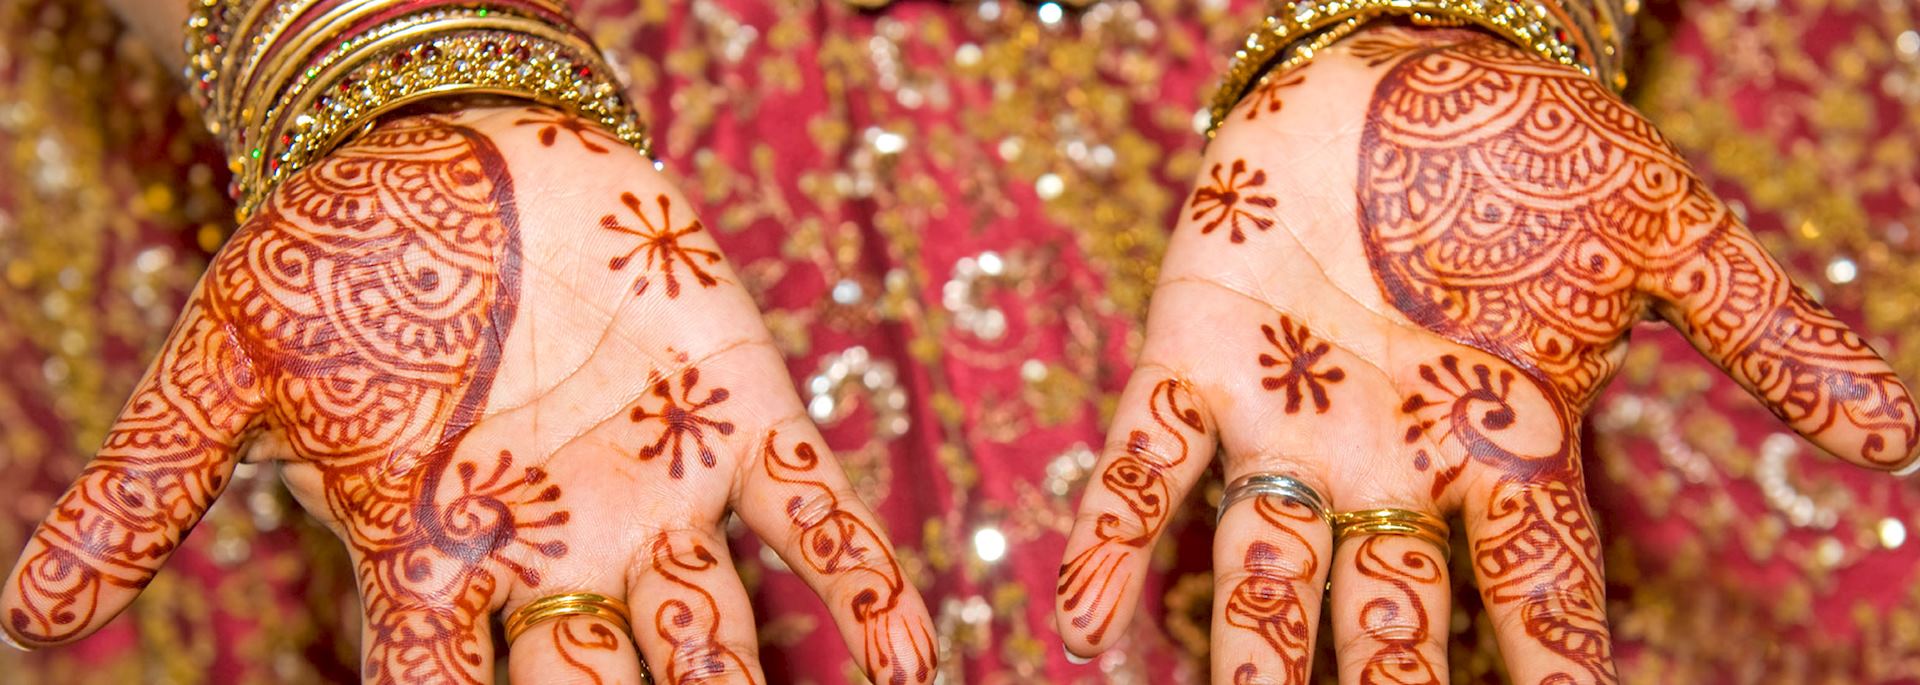 Indian lady's hands covered in henna